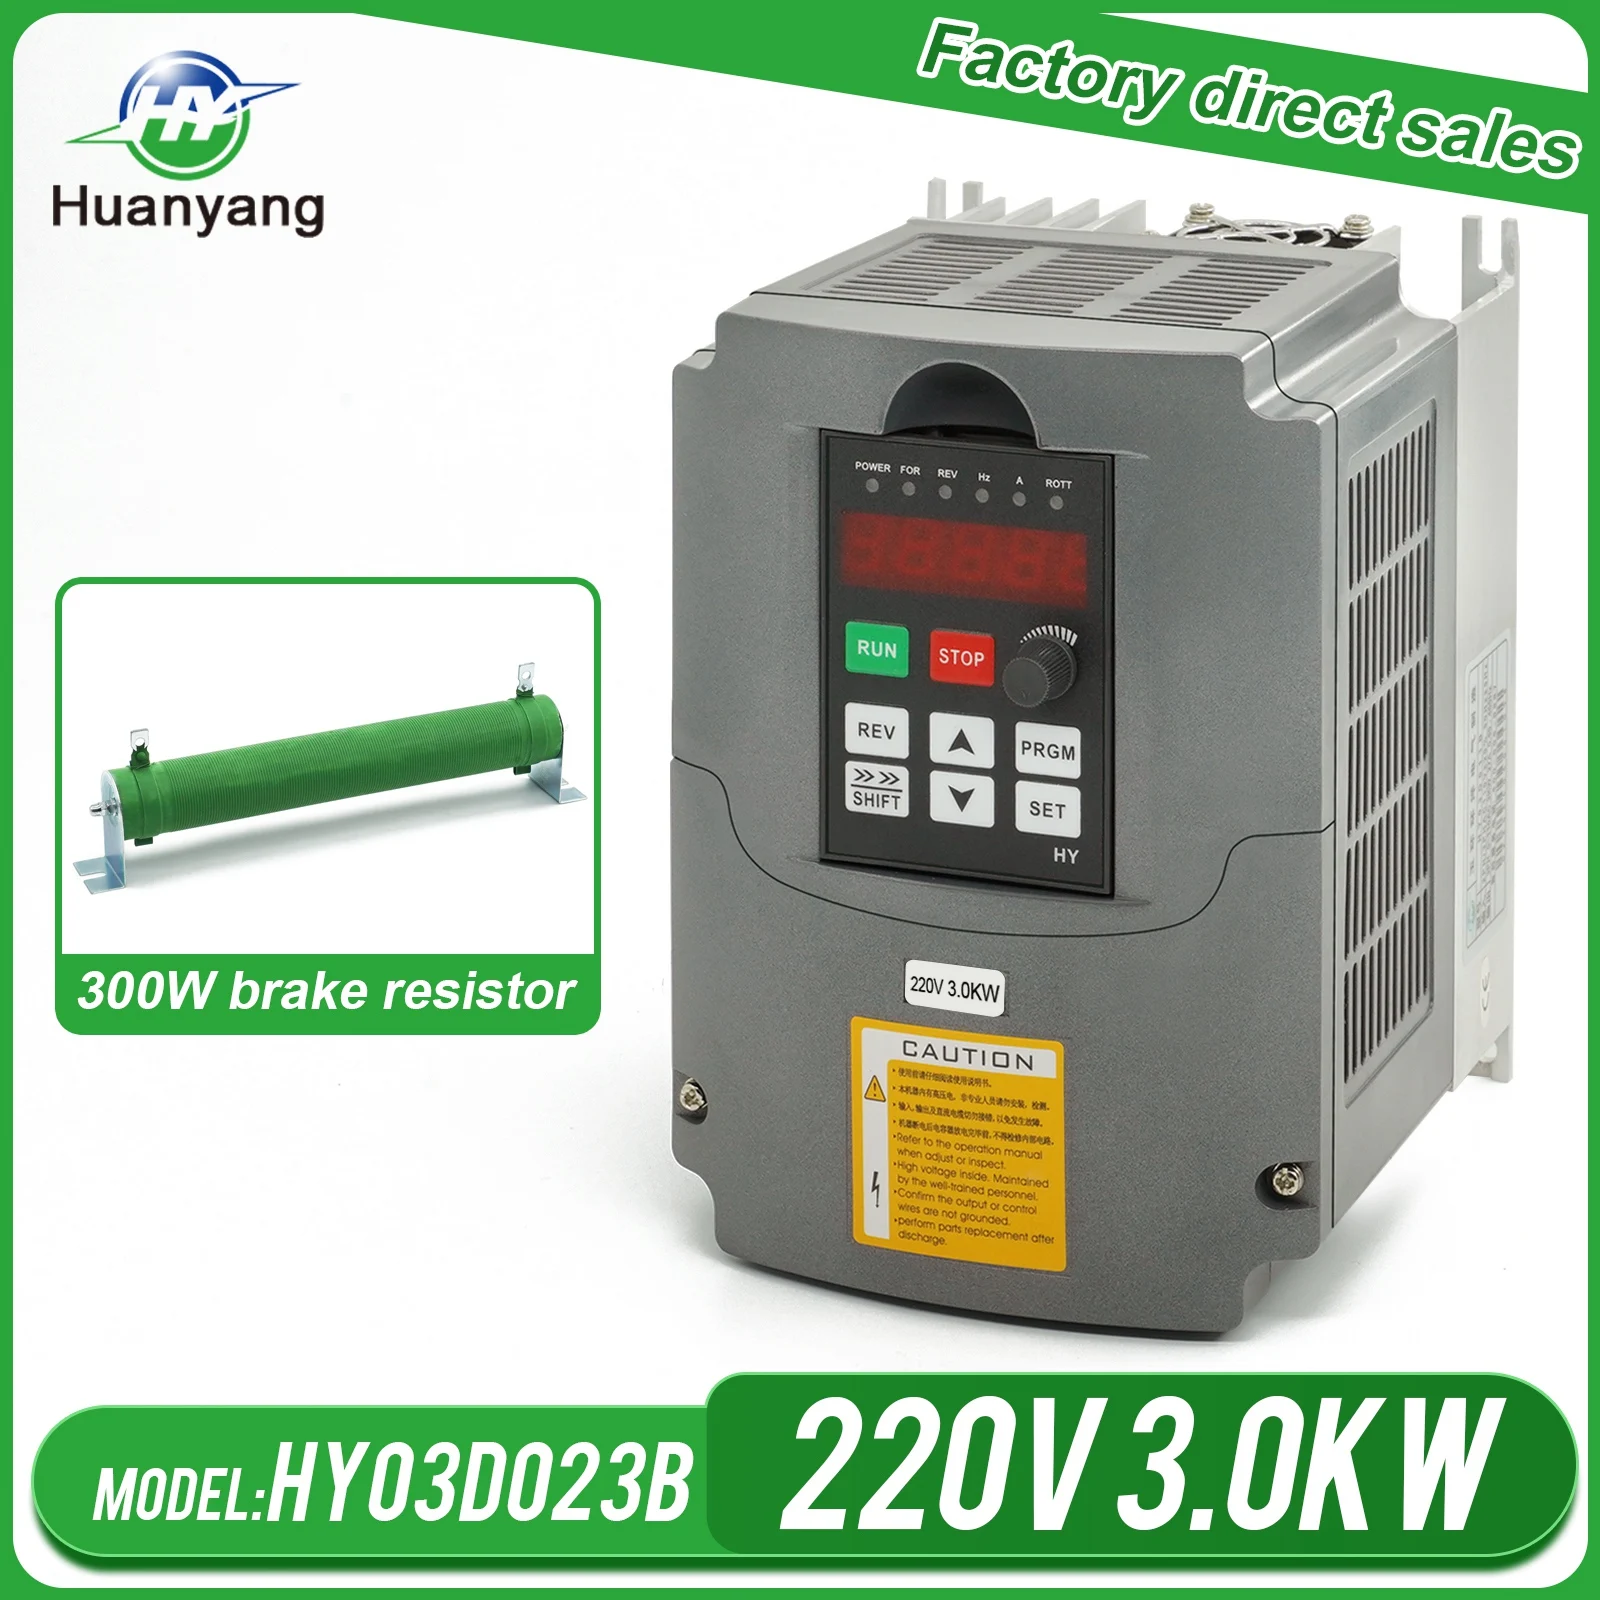 INVERTER VSD HUAN YANG 1.5KW,2.2KW,3KW,4KW,5.5KW,7.5KW VARIABLE FREQUENCY DRIVE 